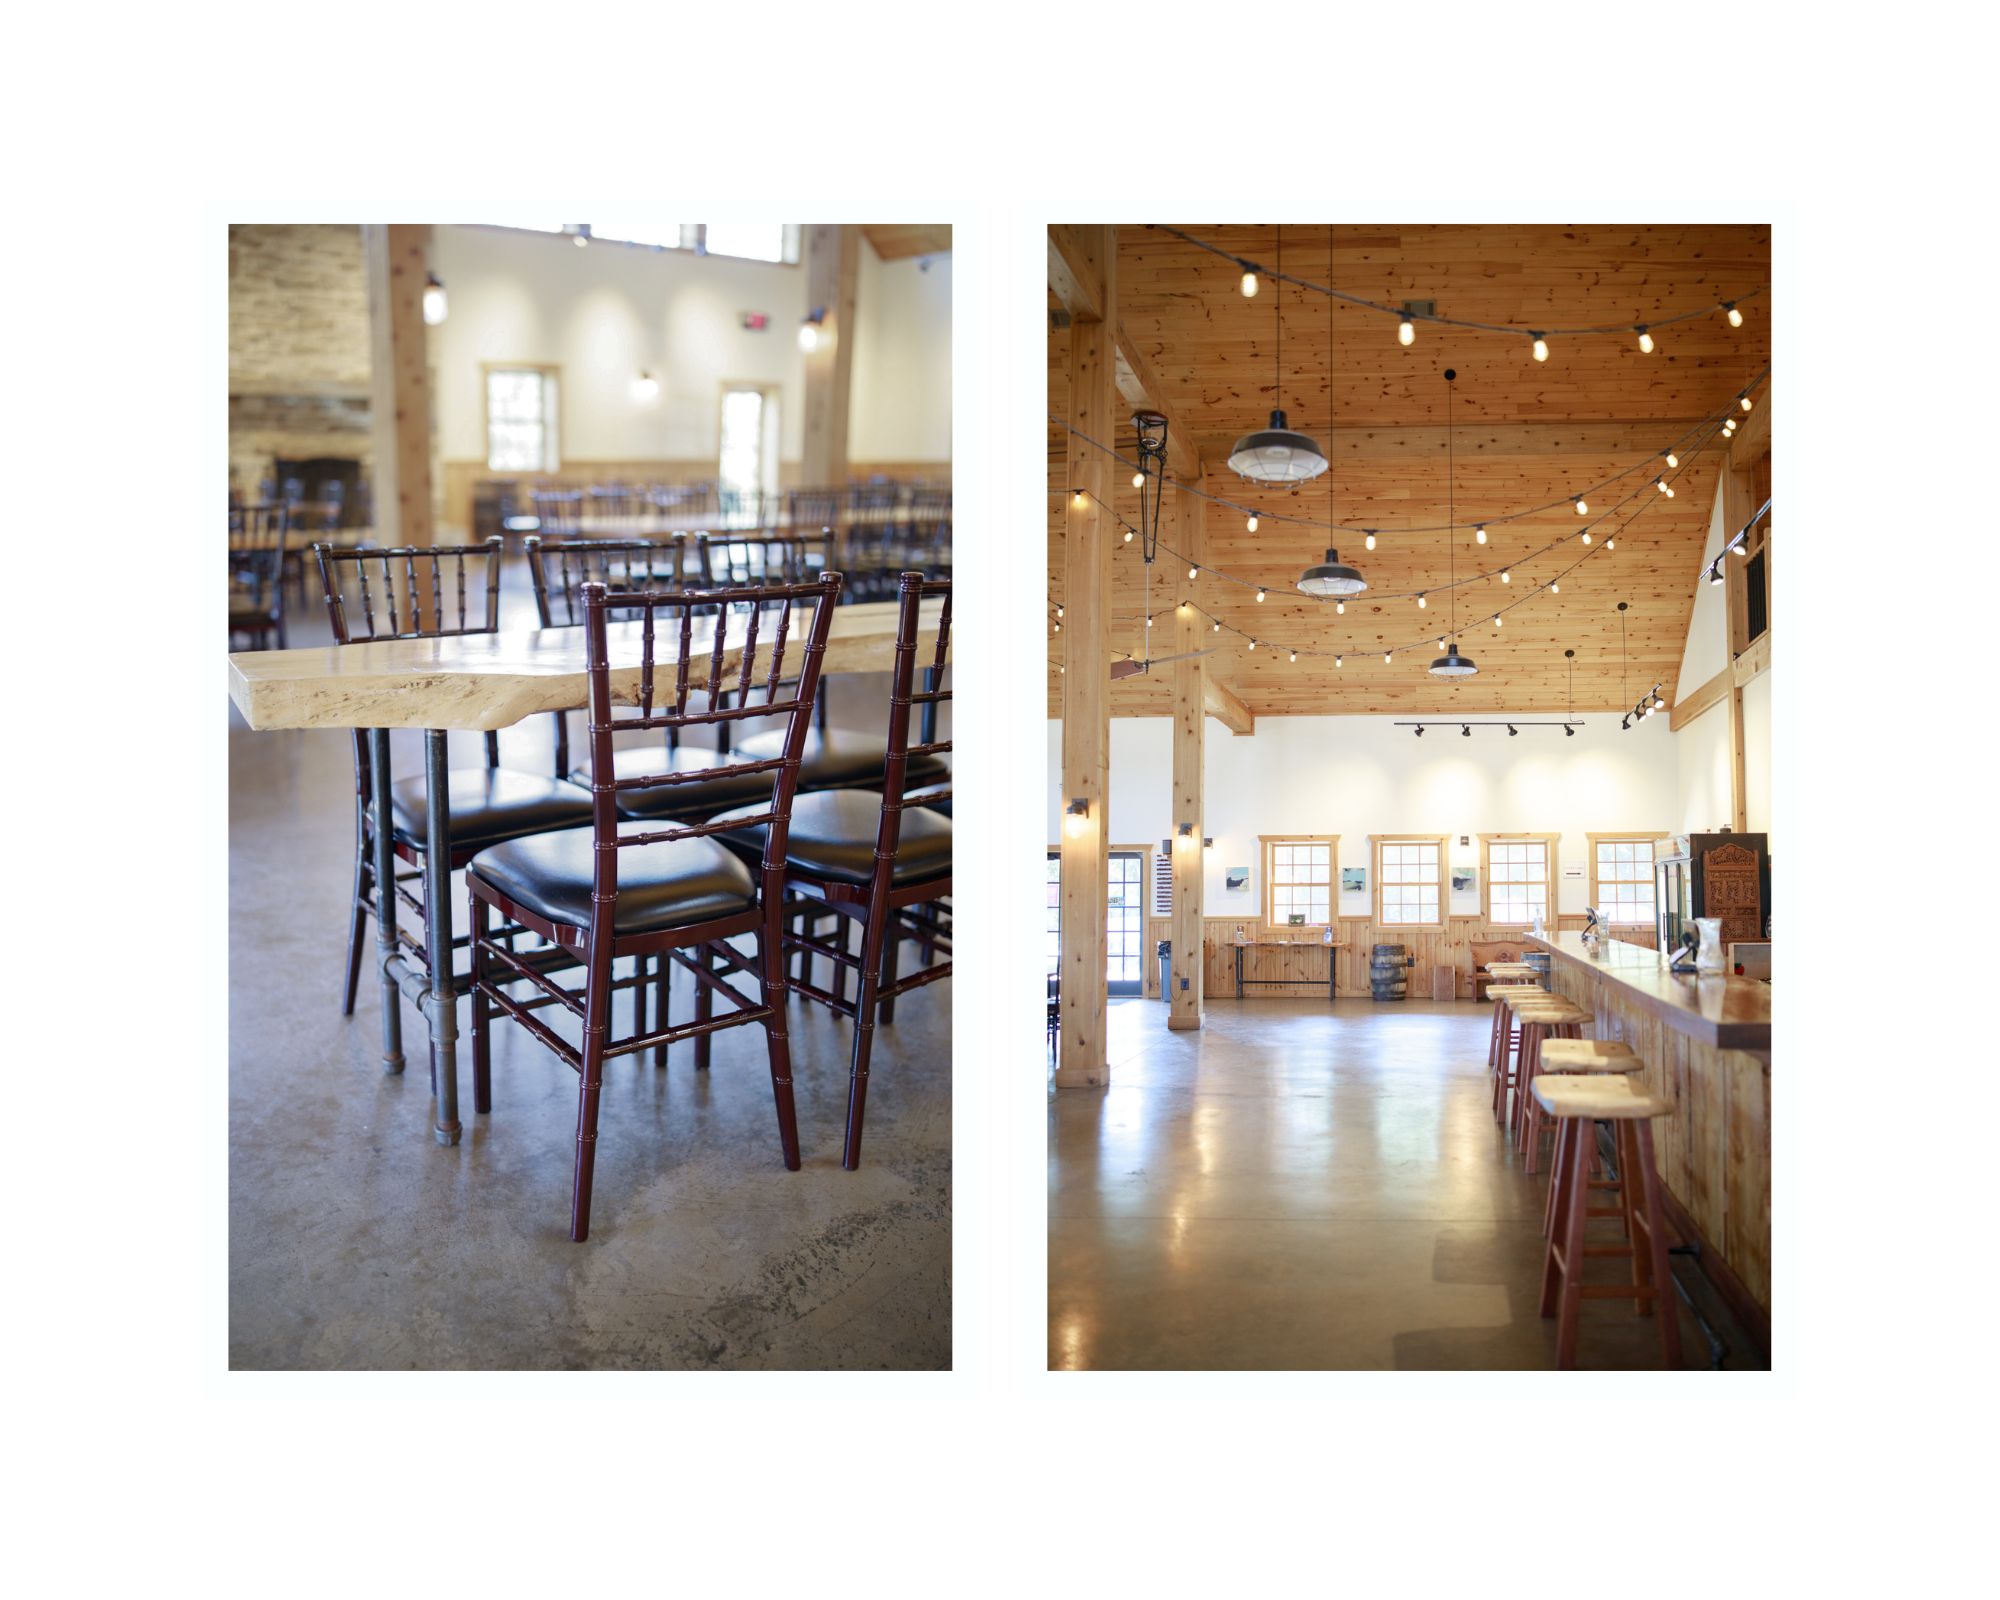 Rustic raw edge tables and chiavari chairs inside where the reception space is.